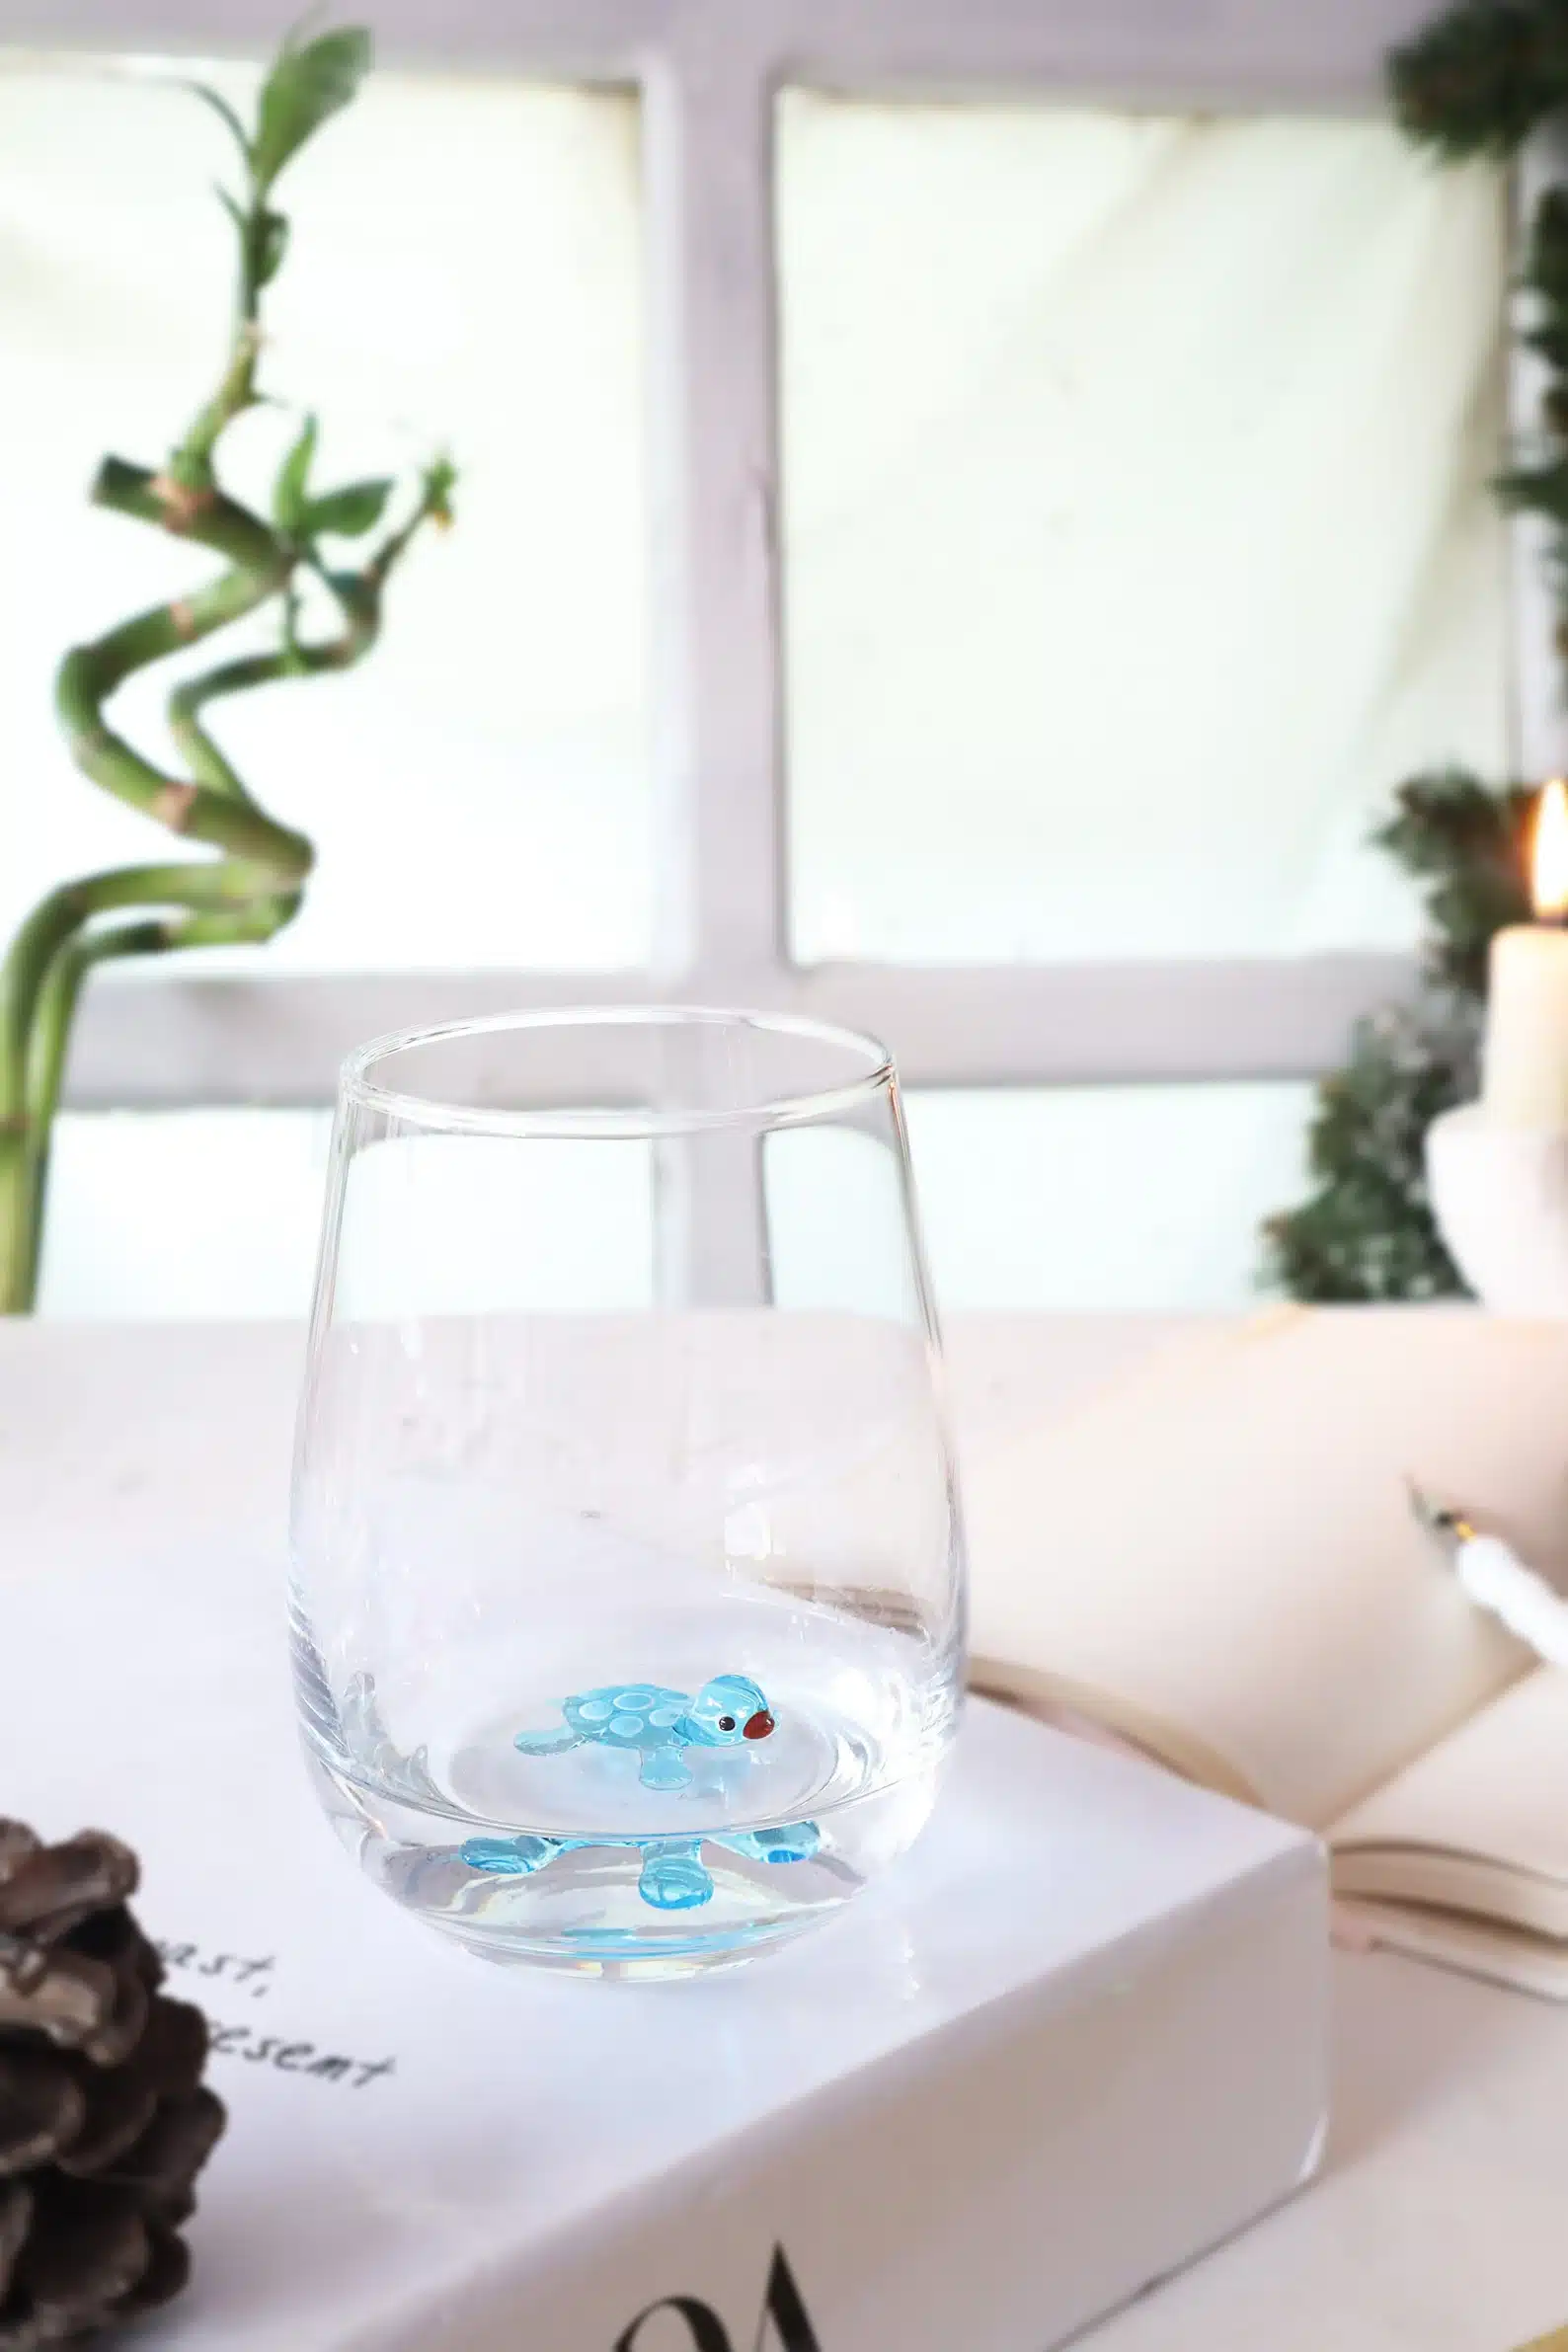 Water Drinking Glasses With Turtle